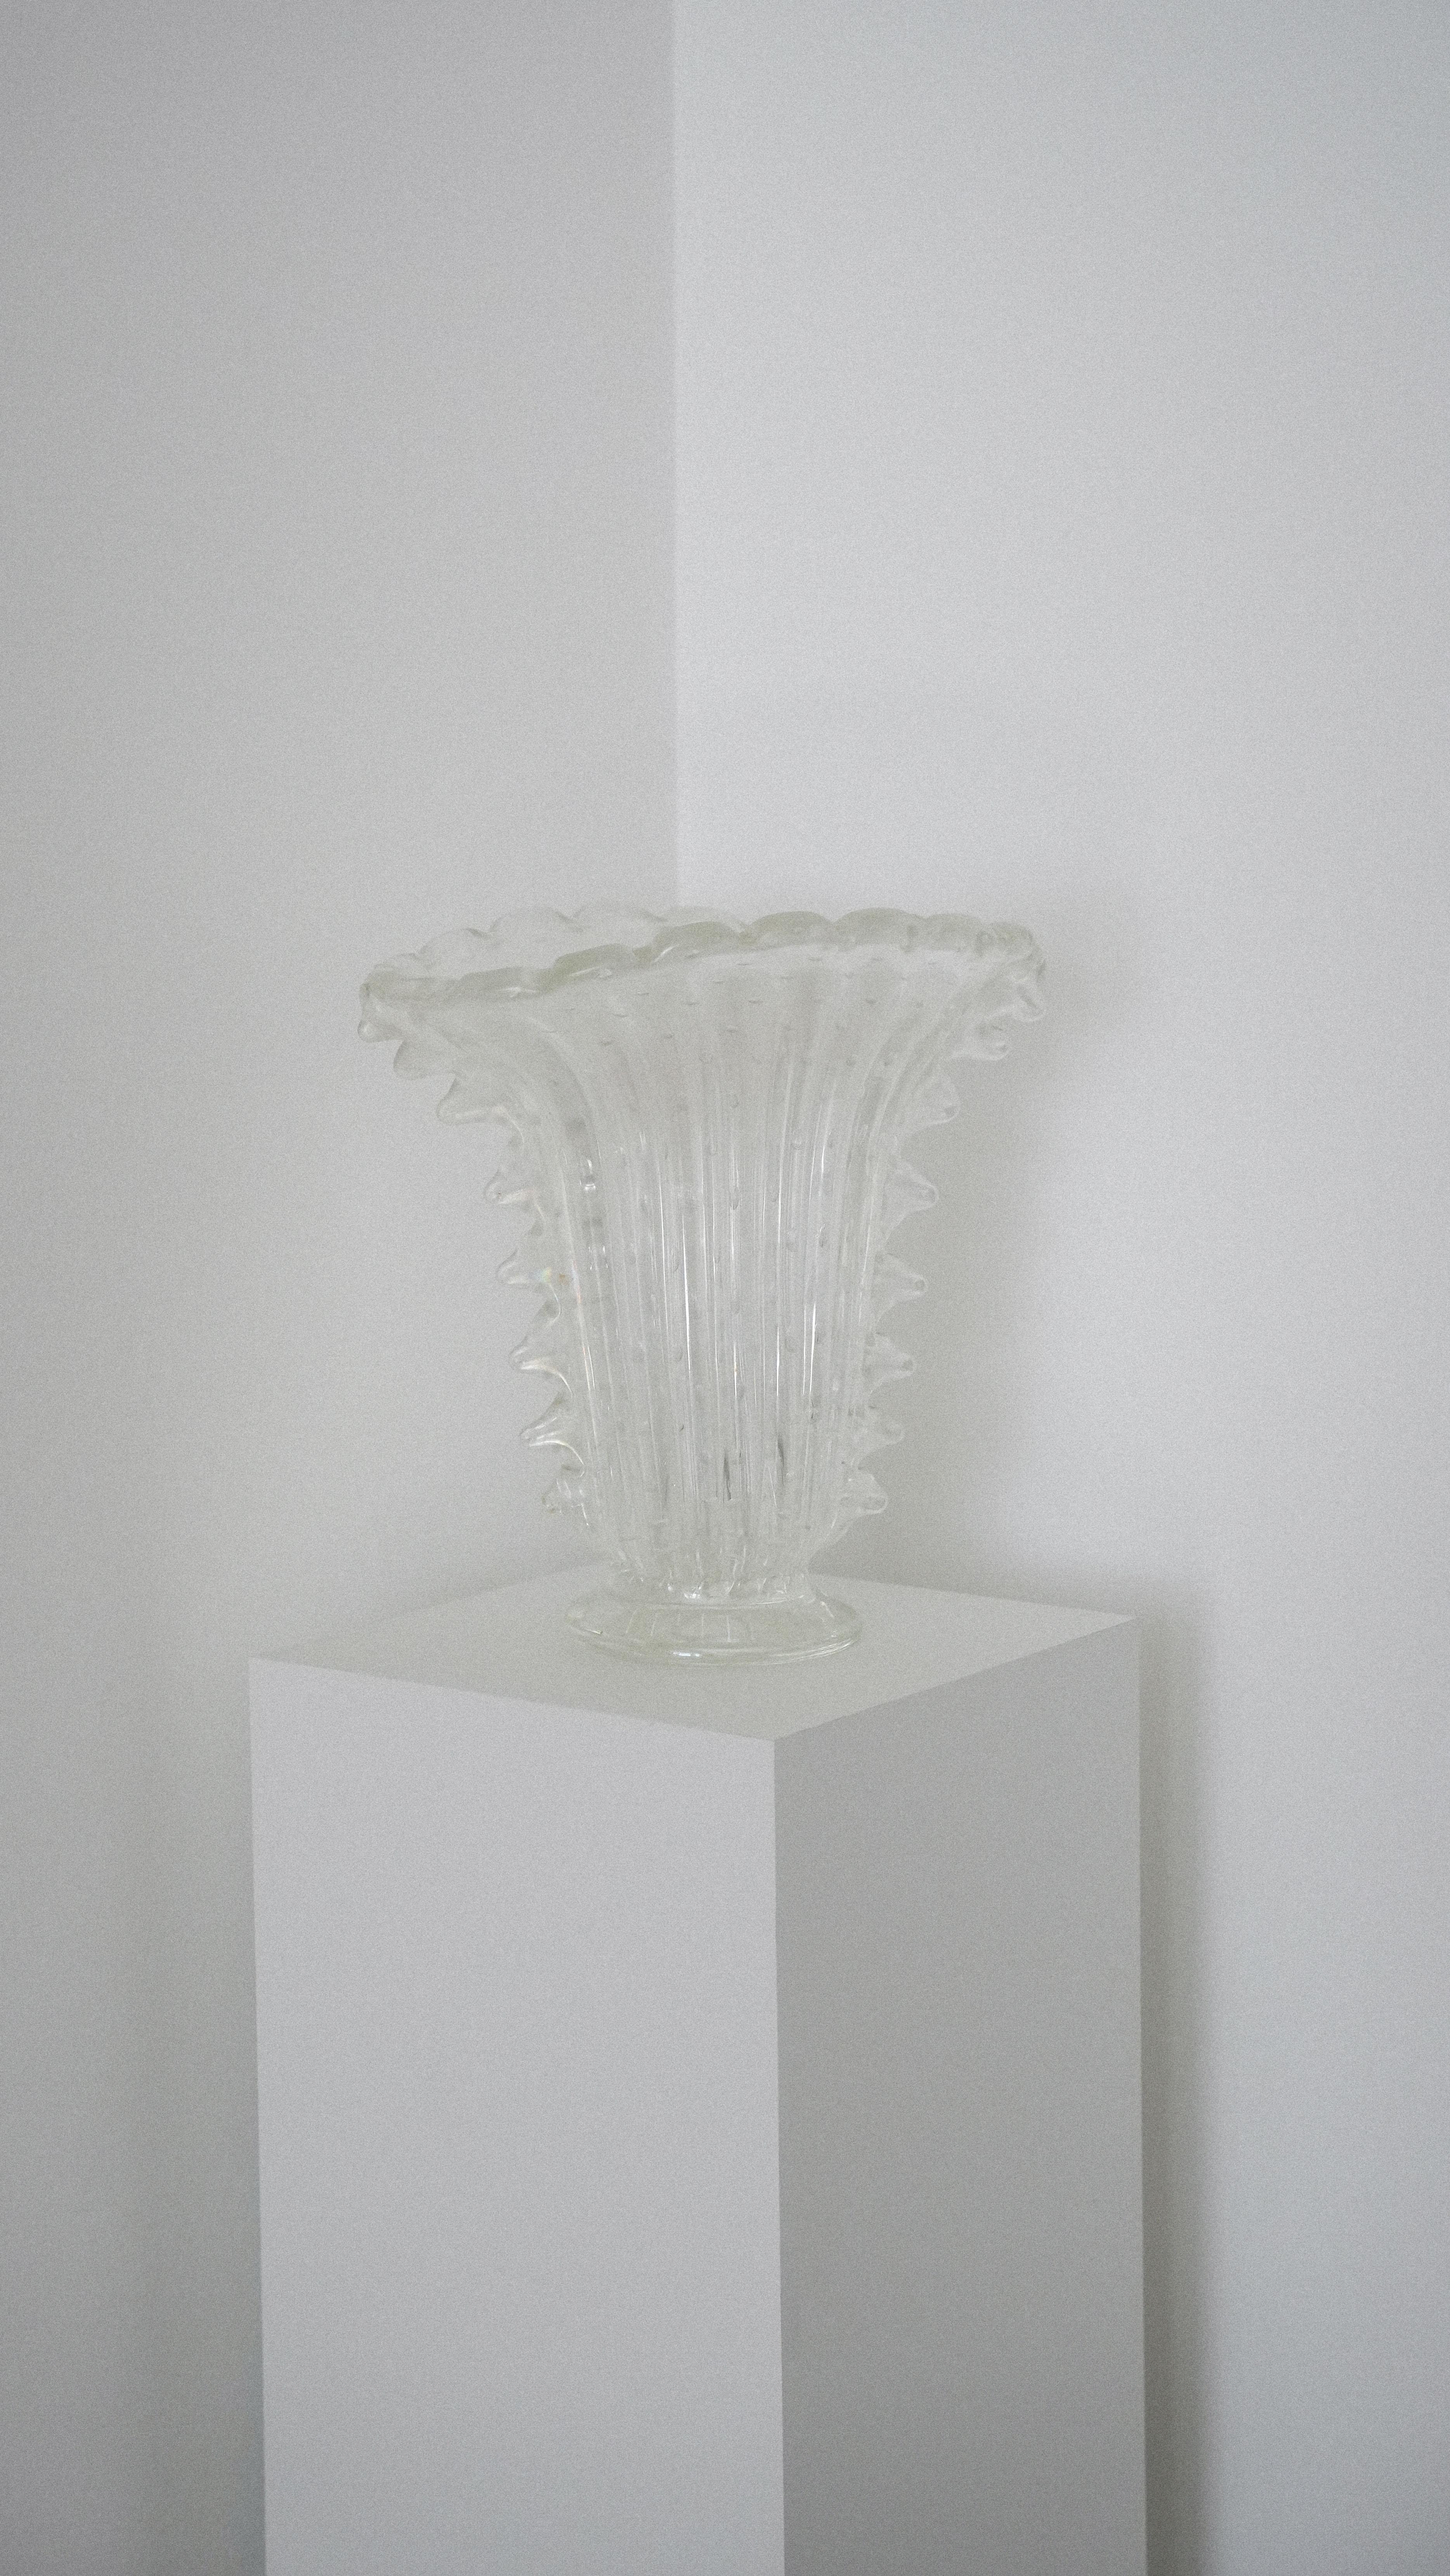 Large Murano glass bullicante vase with lateral “morise” decoration by Ercole Barovier for Barovier & Toso, c. 1940s. 

Hand made in Murano, Italy in the early to mid-20th century, the bullicante technique results in bubbles visible in the glass.